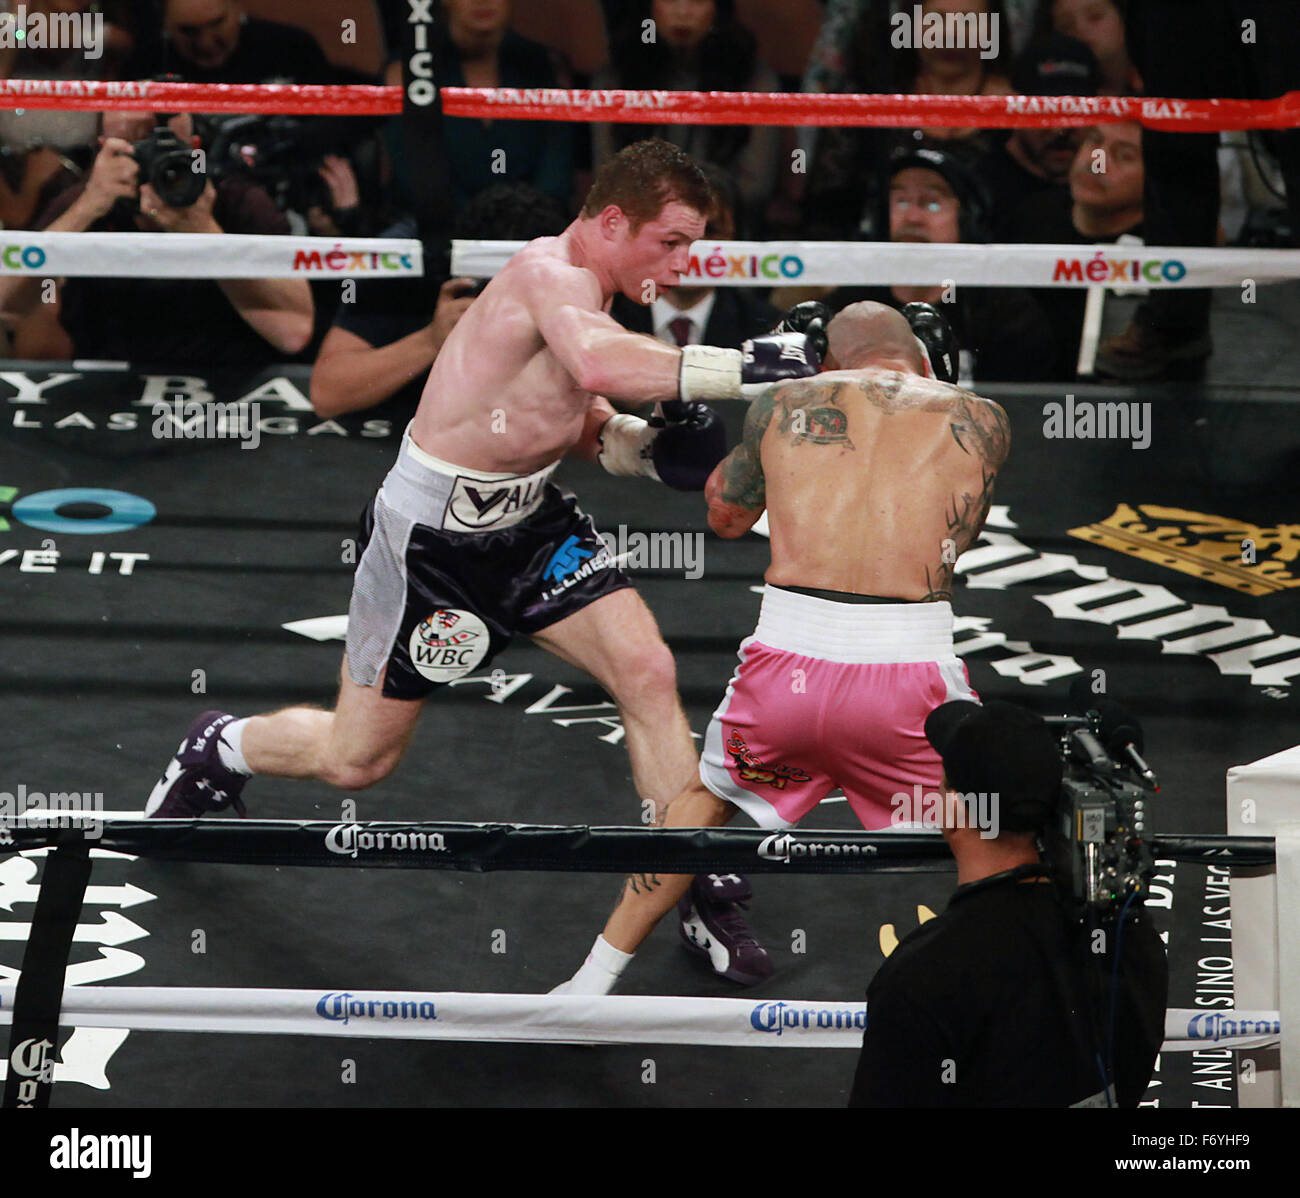 Las Vegas, Nevada, USA. 22nd Nov, 2015. Boxers Miguel Cotto and Saul Canelo Alvarez fight each other during their WBC, Ring Magazine and Lineal Middleweight Championship Boxing match on November 21, 2015 at Mandalay Bay Events Center in Las Vegas, Nevada Credit:  Marcel Thomas/ZUMA Wire/Alamy Live News Stock Photo